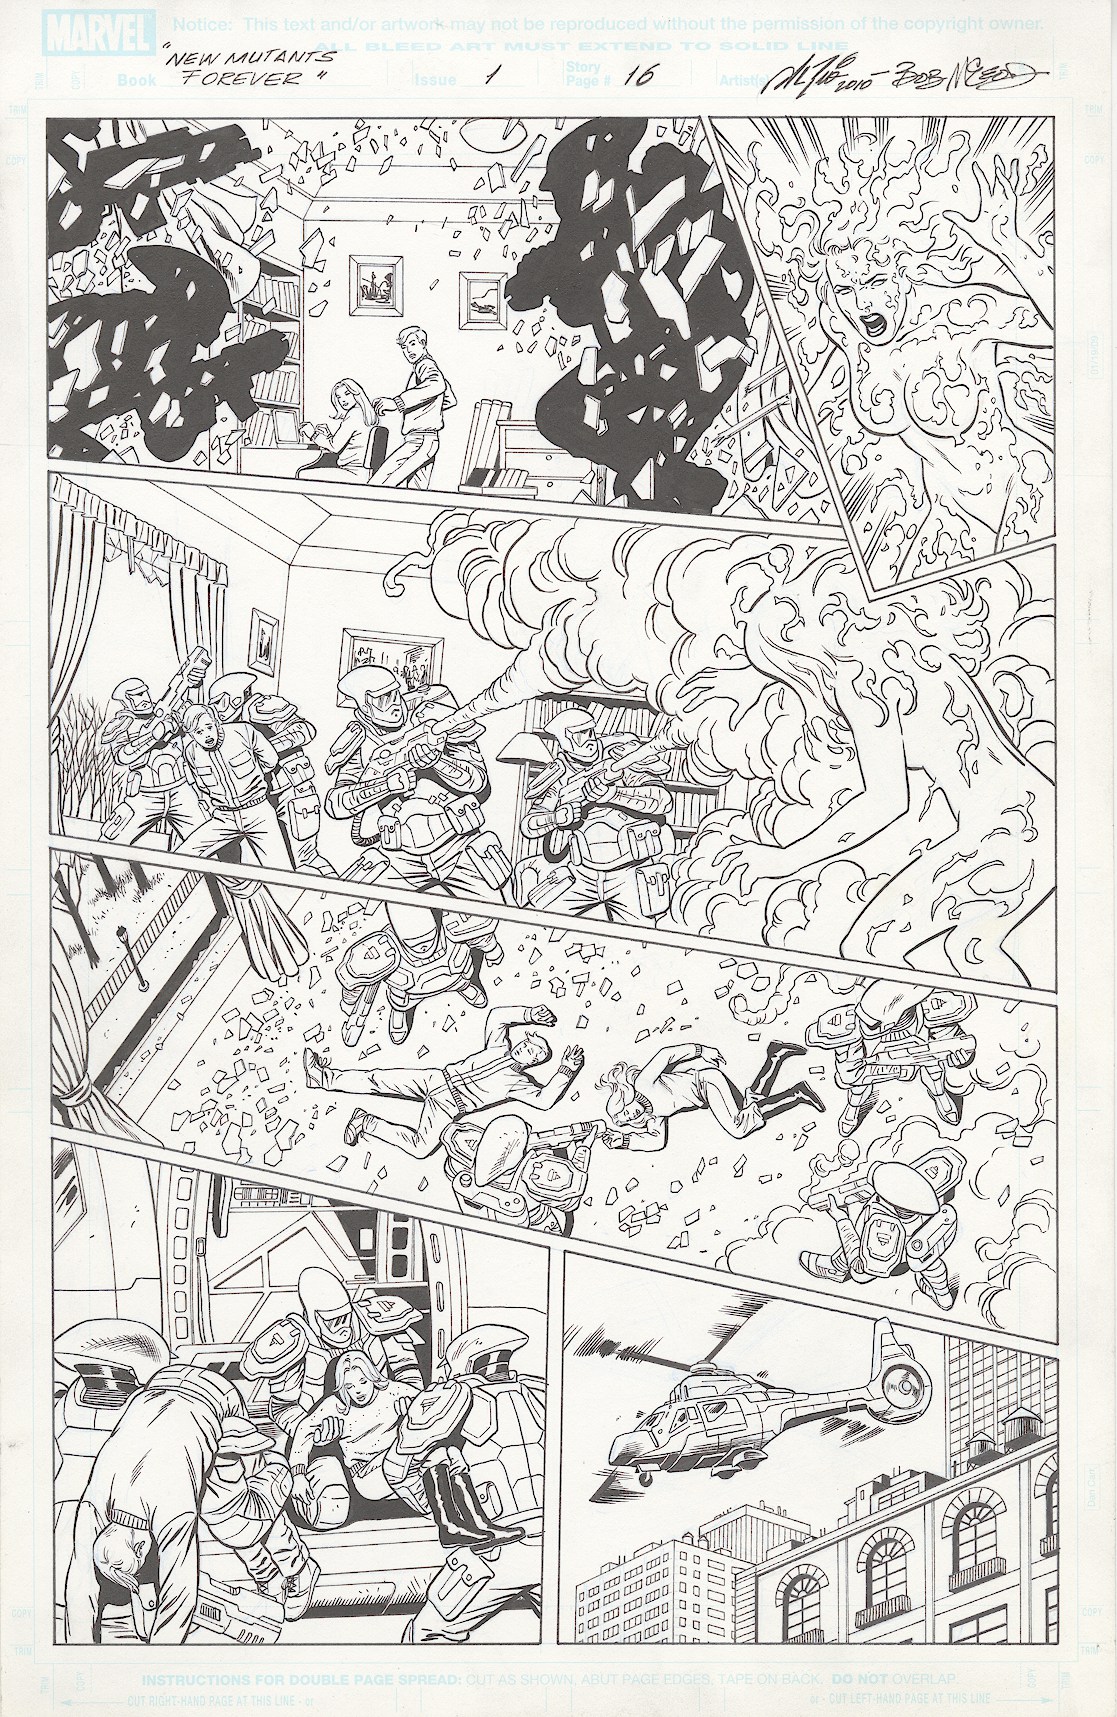 New Mutants Forever #1, Page 16